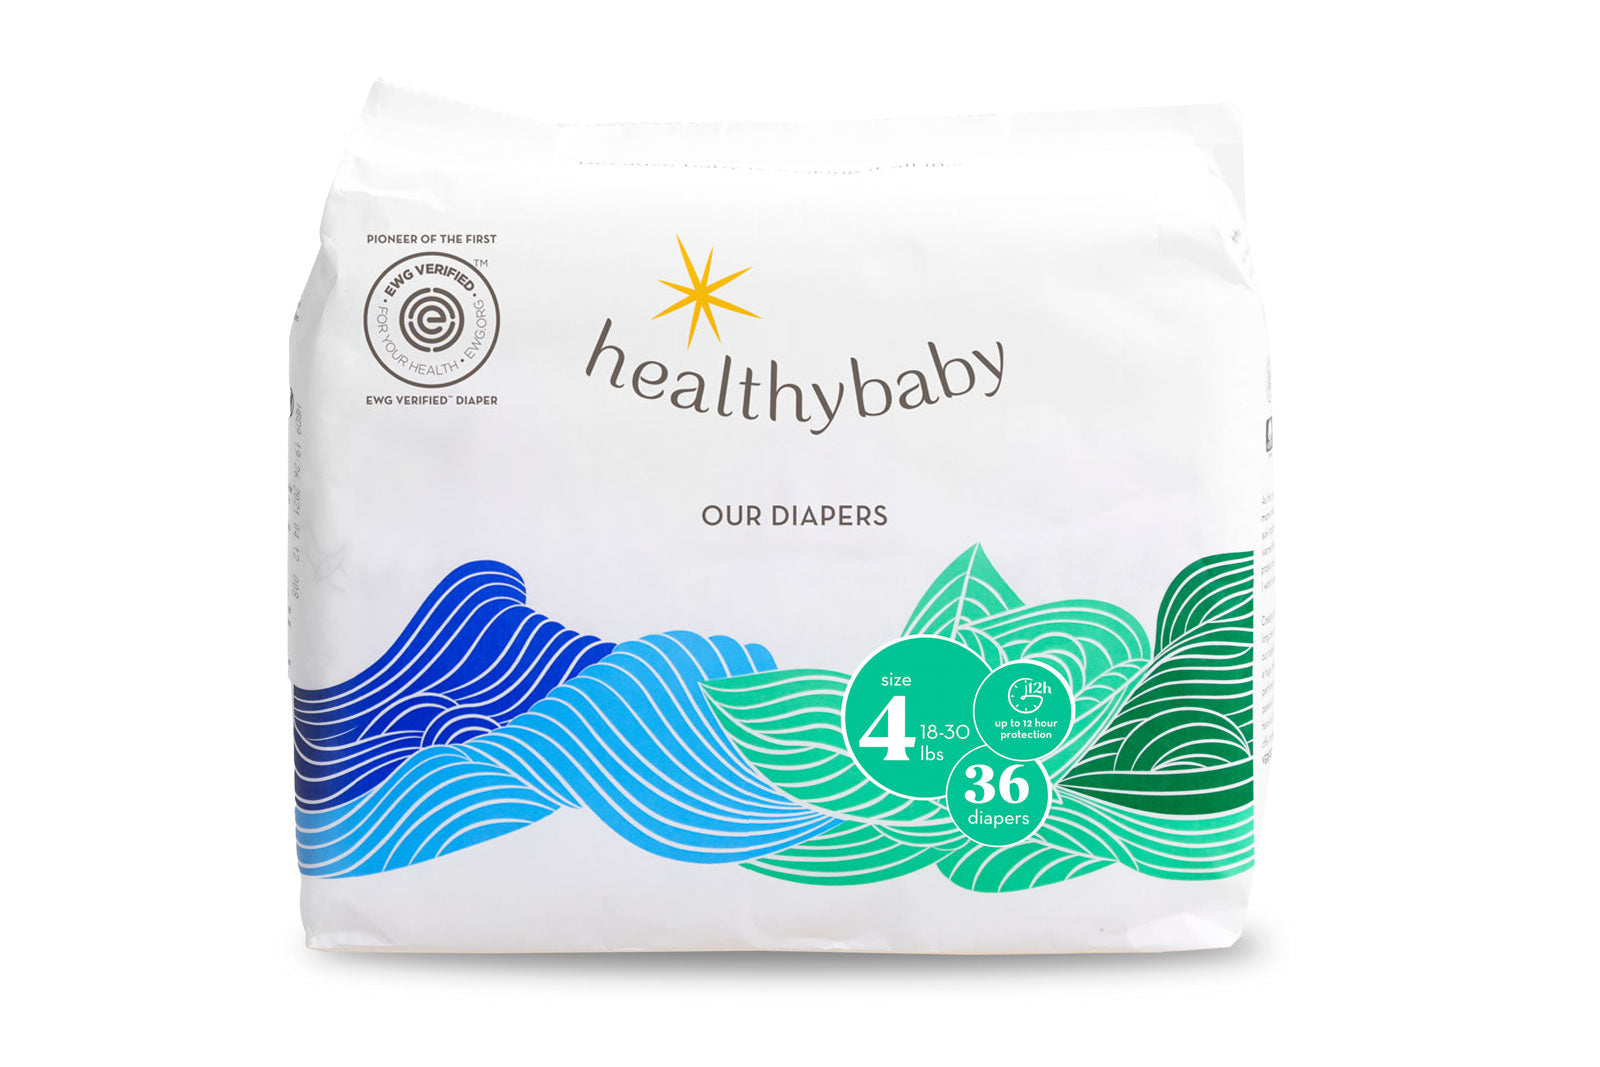 HealthyBaby Diapers – The Only EWG-Verified Diaper